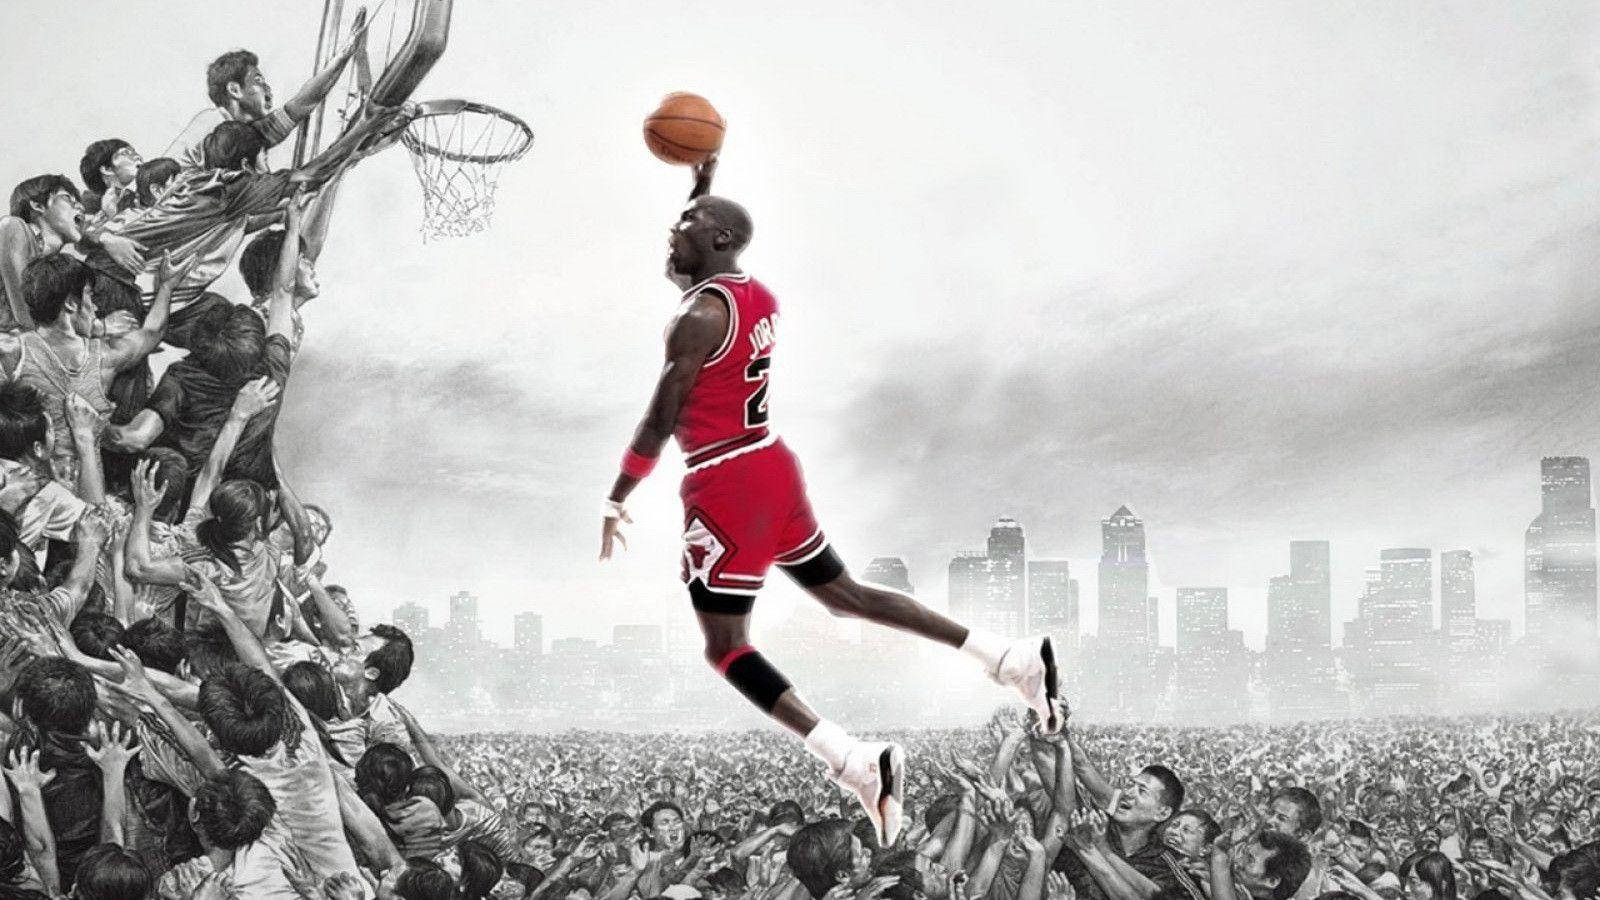 Michael Jordan Drives To The Hoop In His Famous White, Red And Black Air Jordans Background